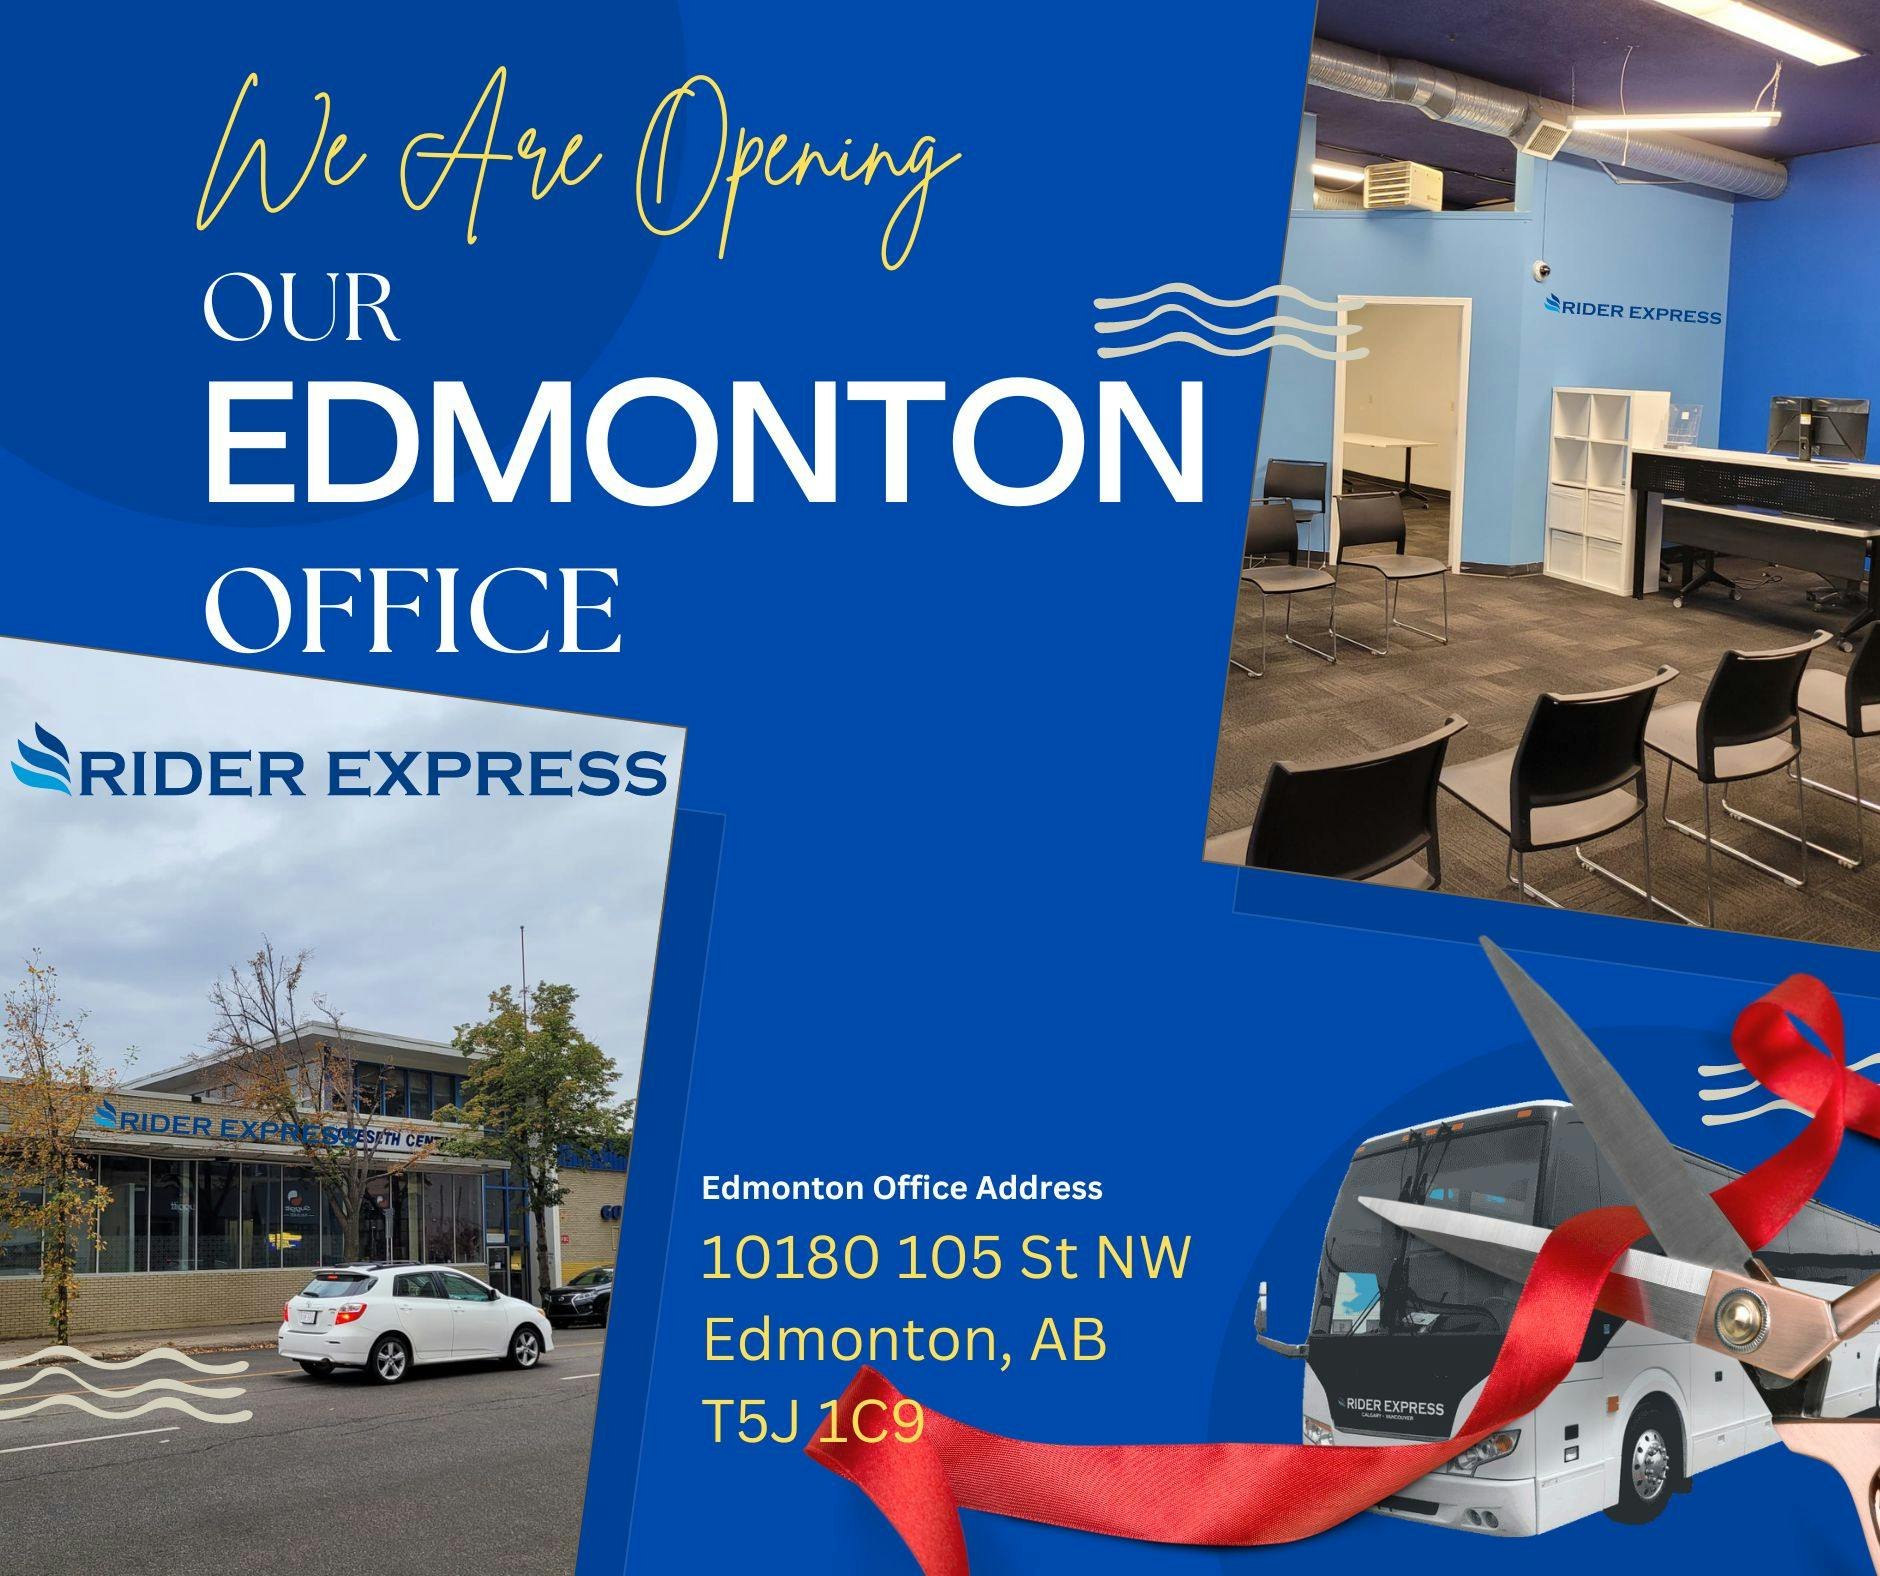 Rider Express is now opening Edmonton Office